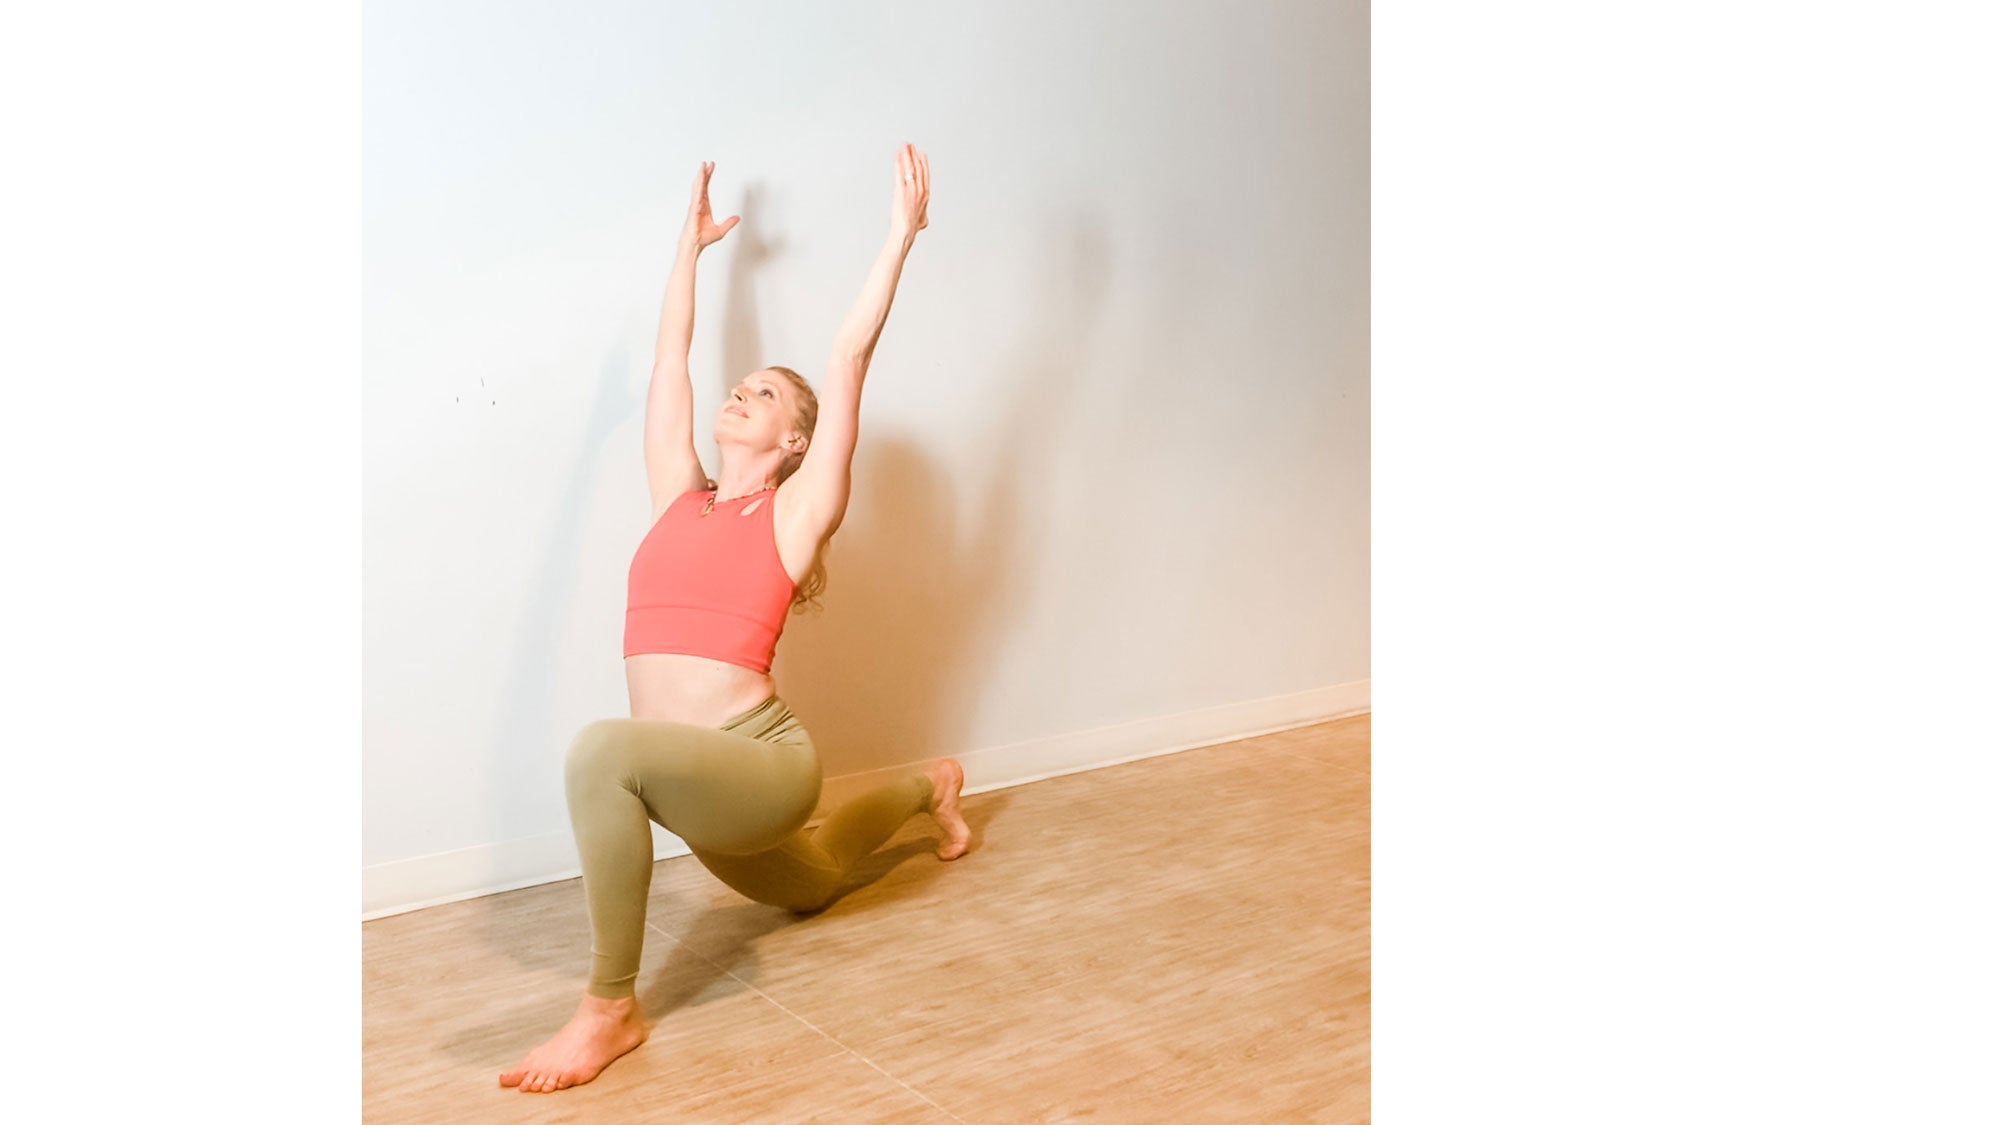 6 Strong Postures to Prep for Side Crow Pose